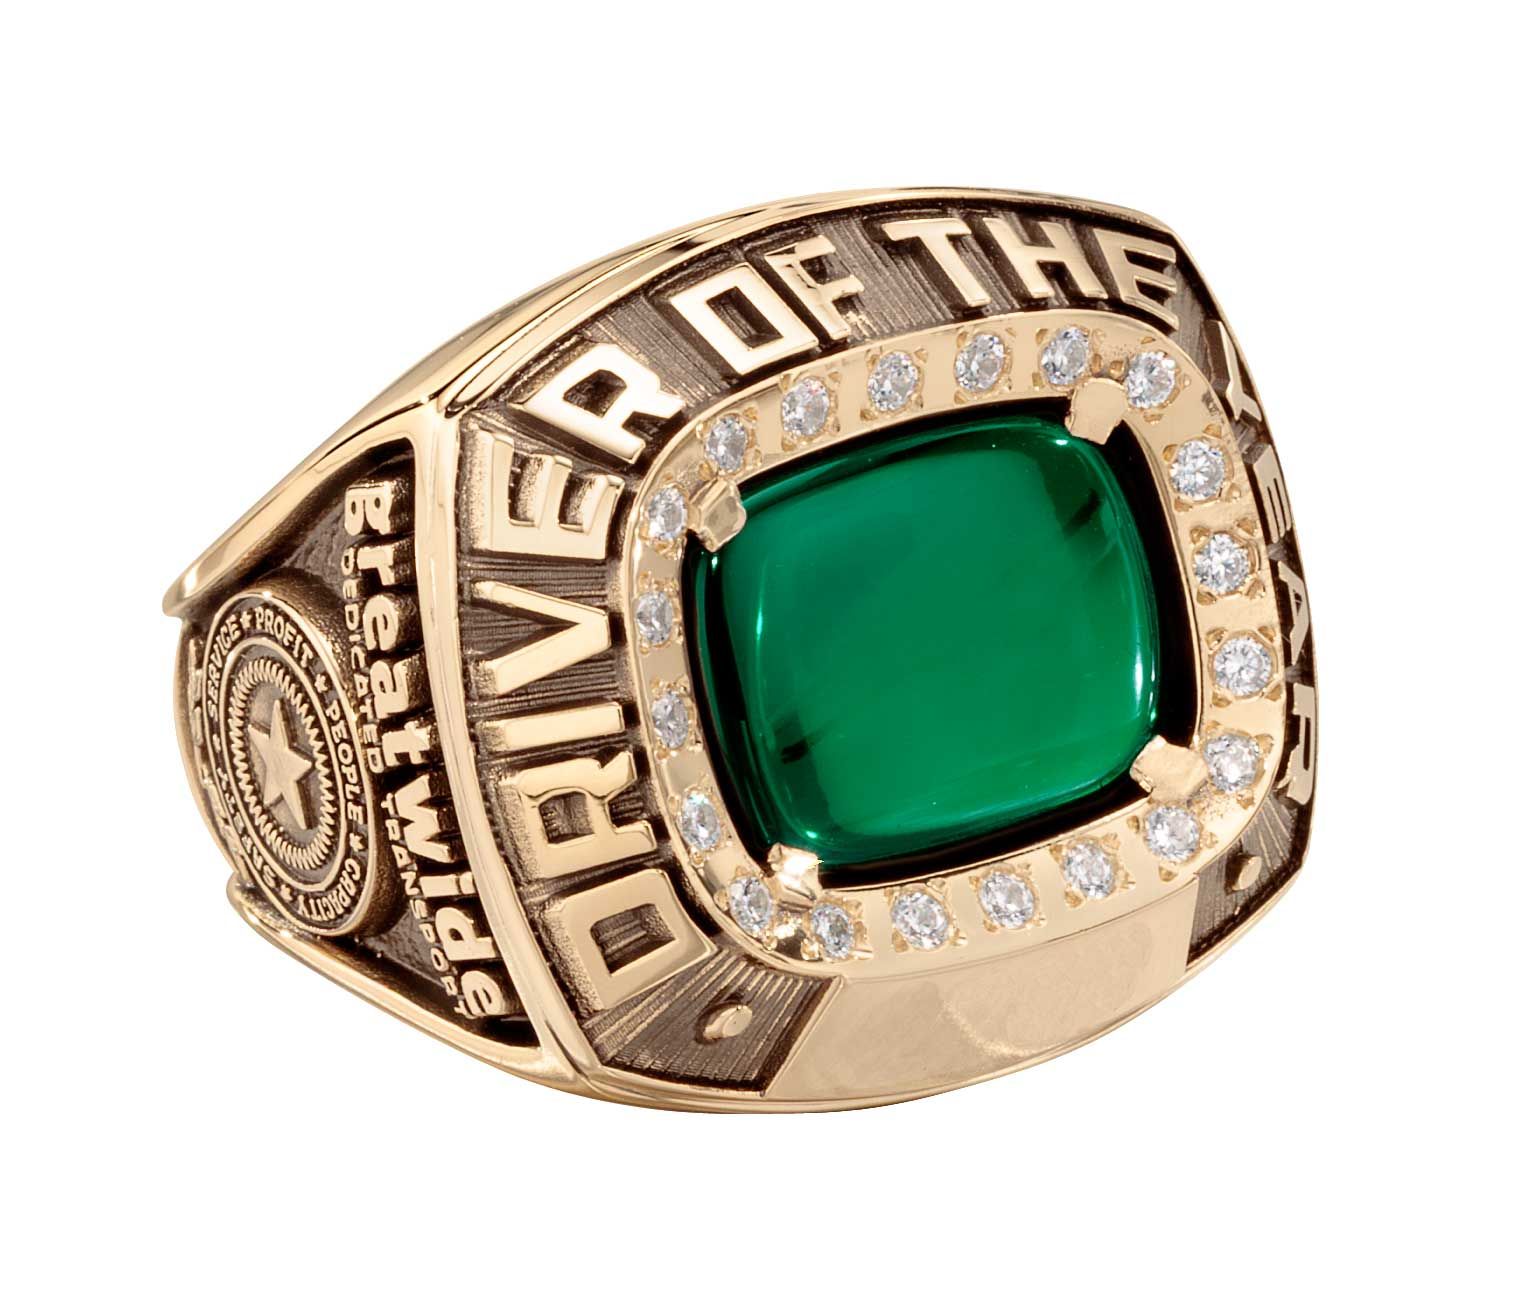 Greatwide Driver of the Year Ring